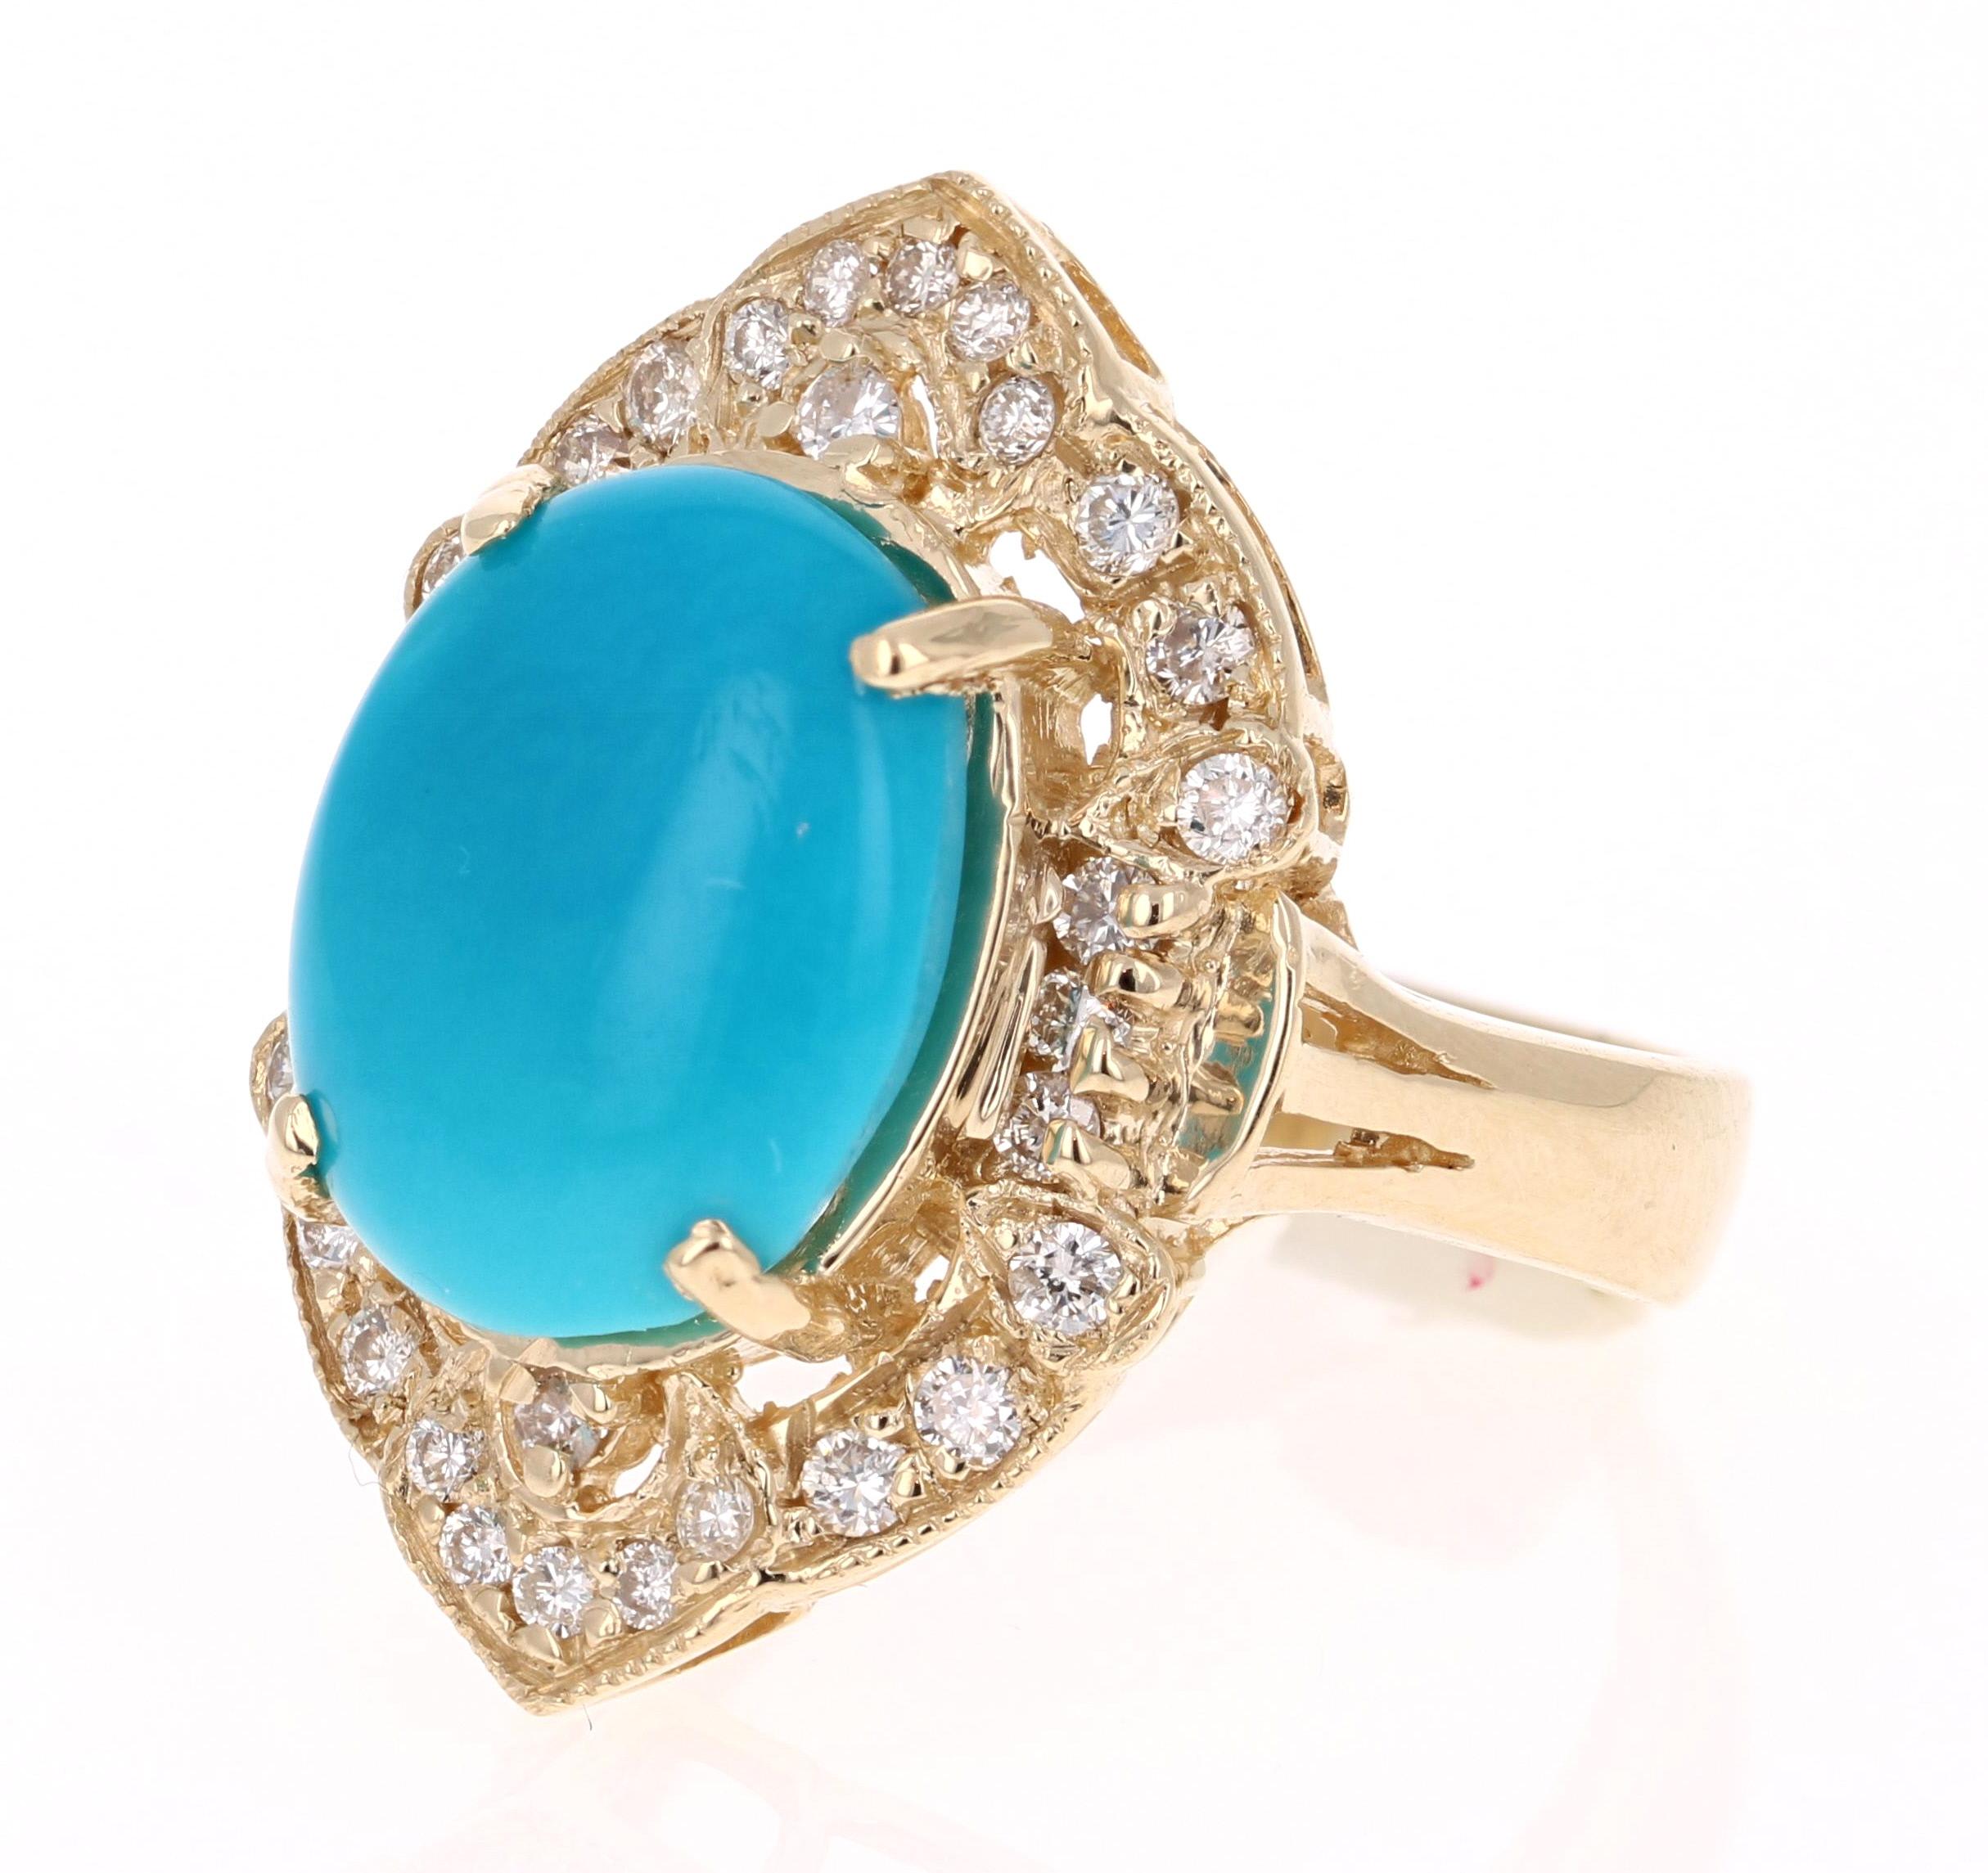 Beautiful Turquoise Diamond Cabochon Art Deco Style Cocktail Ring!
The Oval Cut Cabochon Turquoise is 4.81 Carats and has 30 Round Cut Diamonds weighing 0.52 Carats (Clarity: VS2, Color: H). The total carat weight of the ring is 5.33 Carats. 
It is